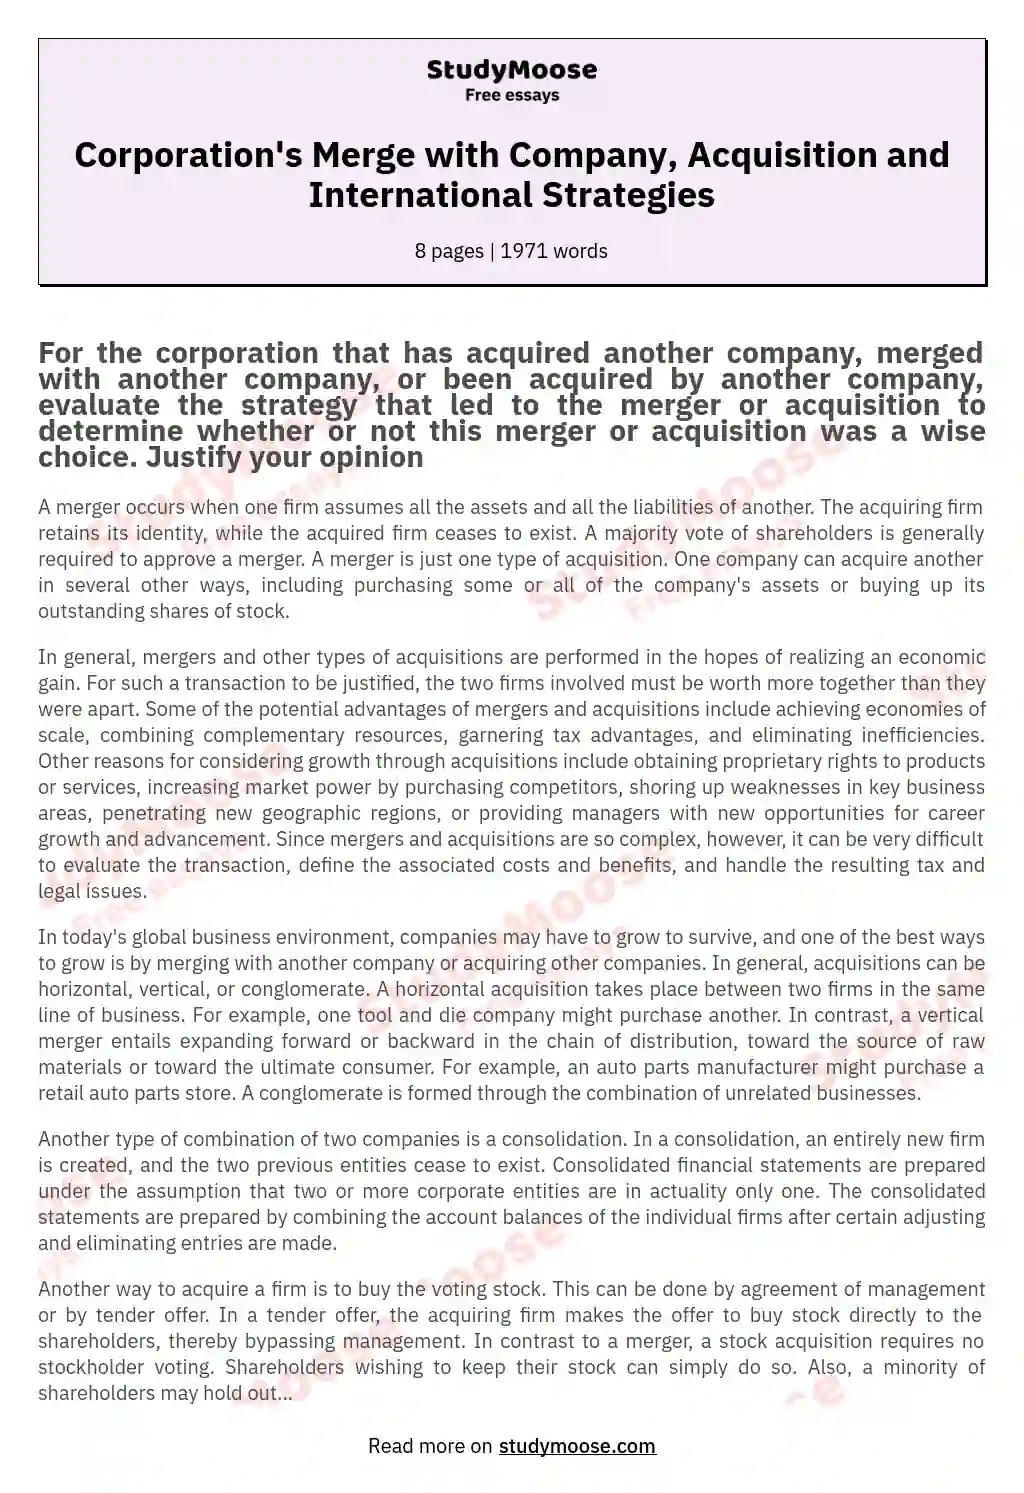 Corporation's Merge with Company, Acquisition and International Strategies essay